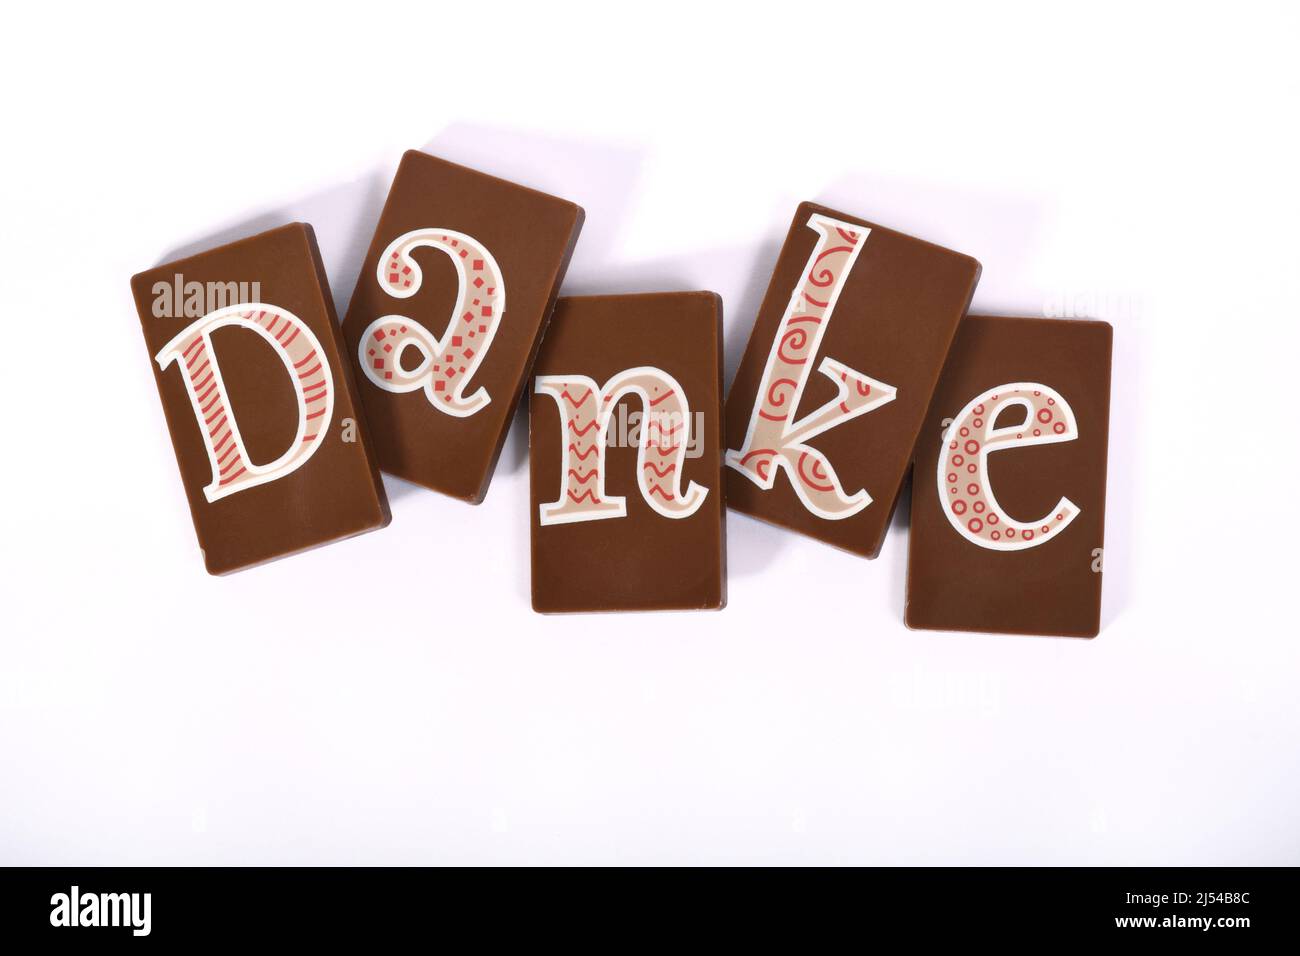 letters on chocolate bars make the word 'Danke', 'Thank you', Germany Stock Photo